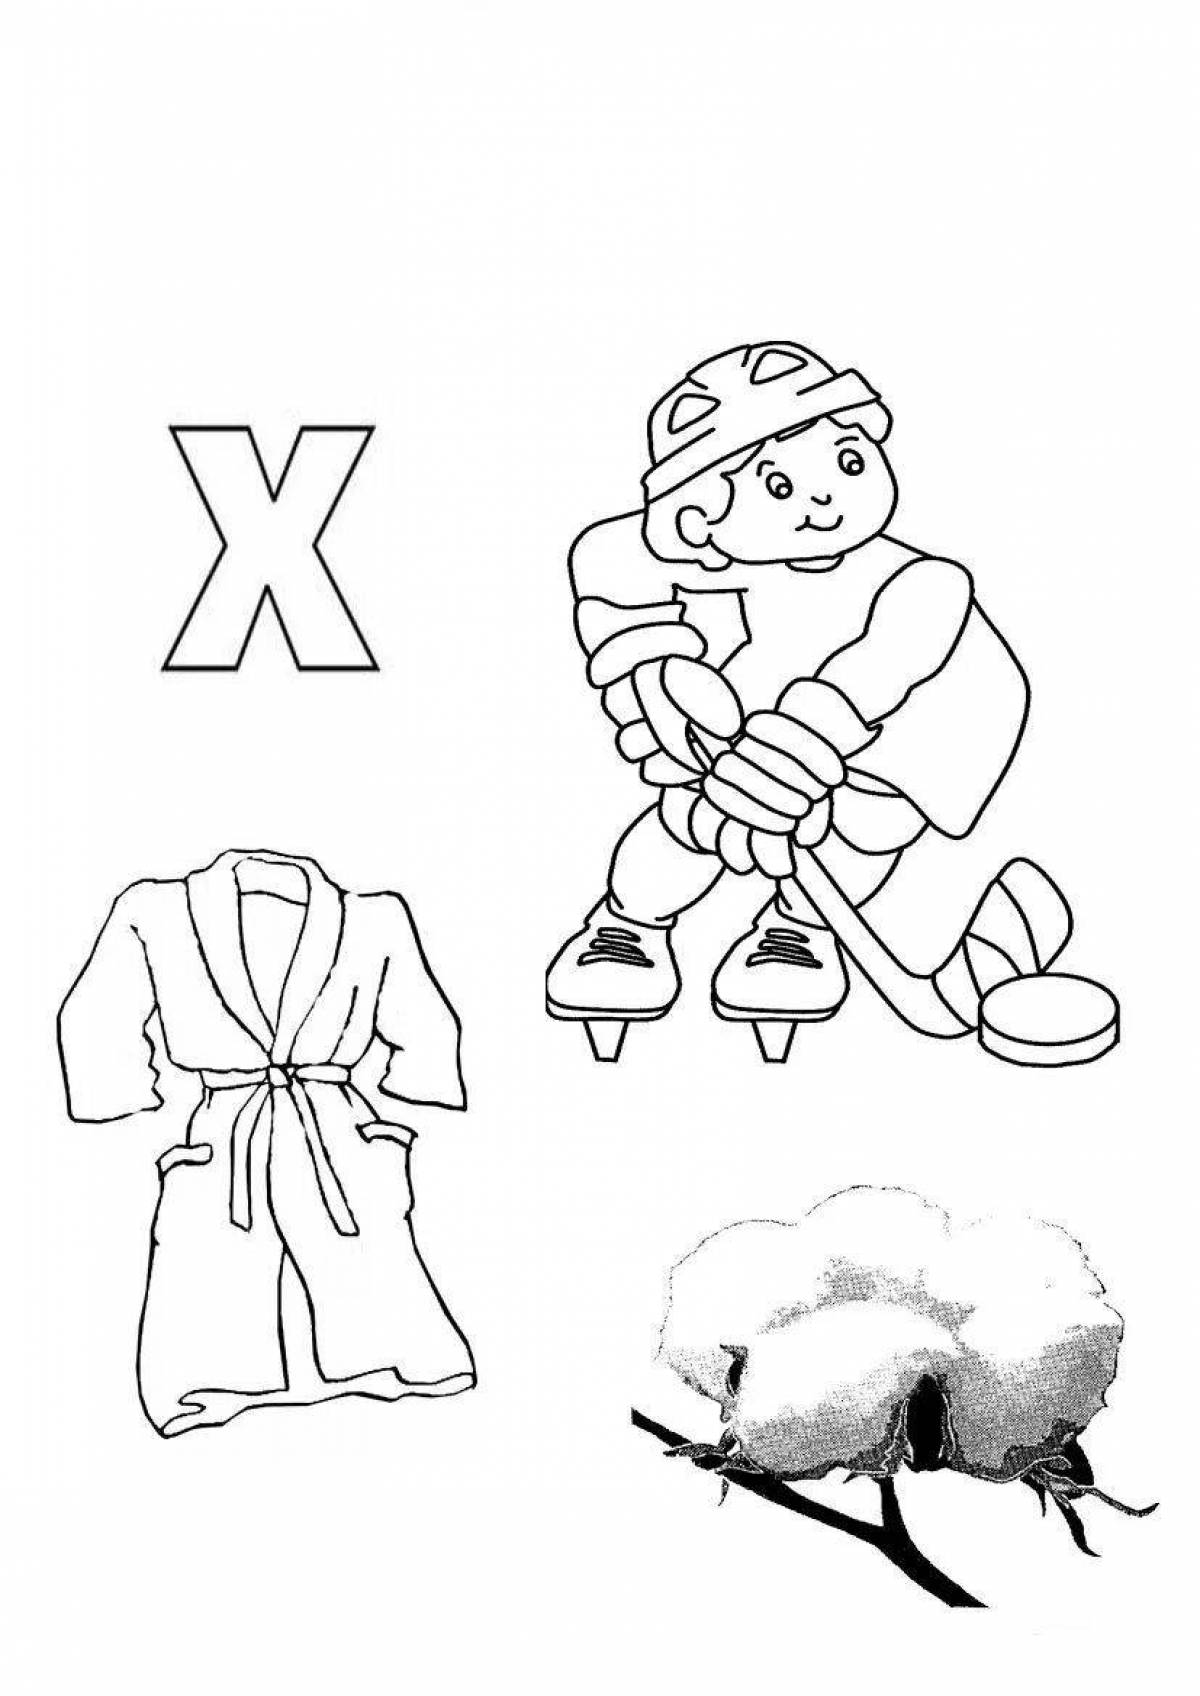 Adorable letter x coloring book for kids